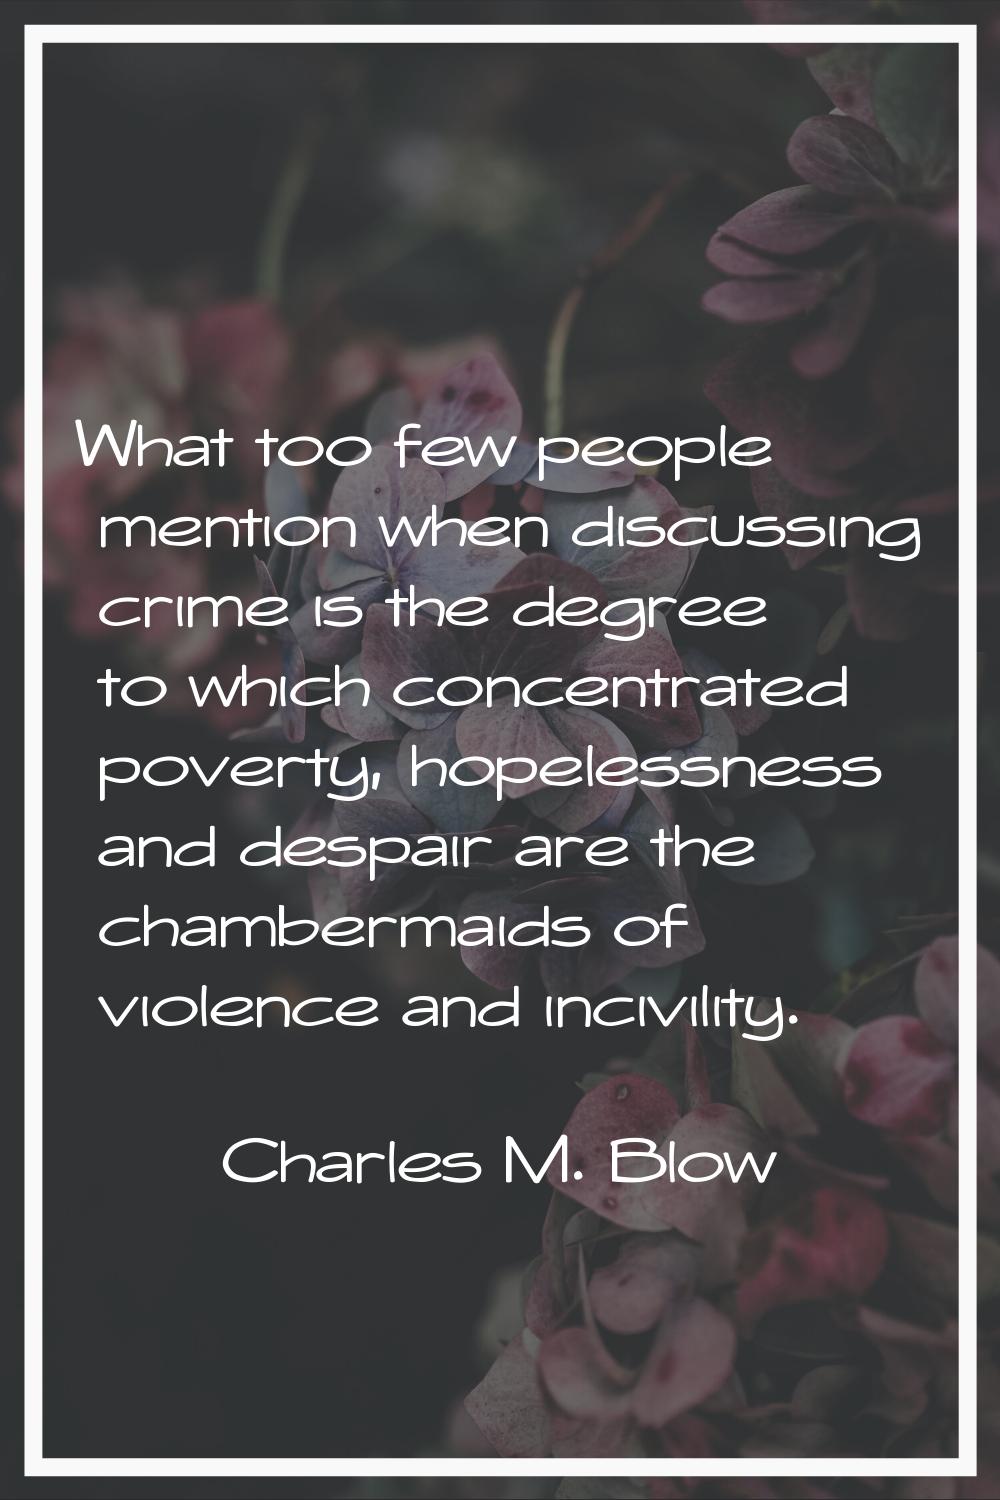 What too few people mention when discussing crime is the degree to which concentrated poverty, hope